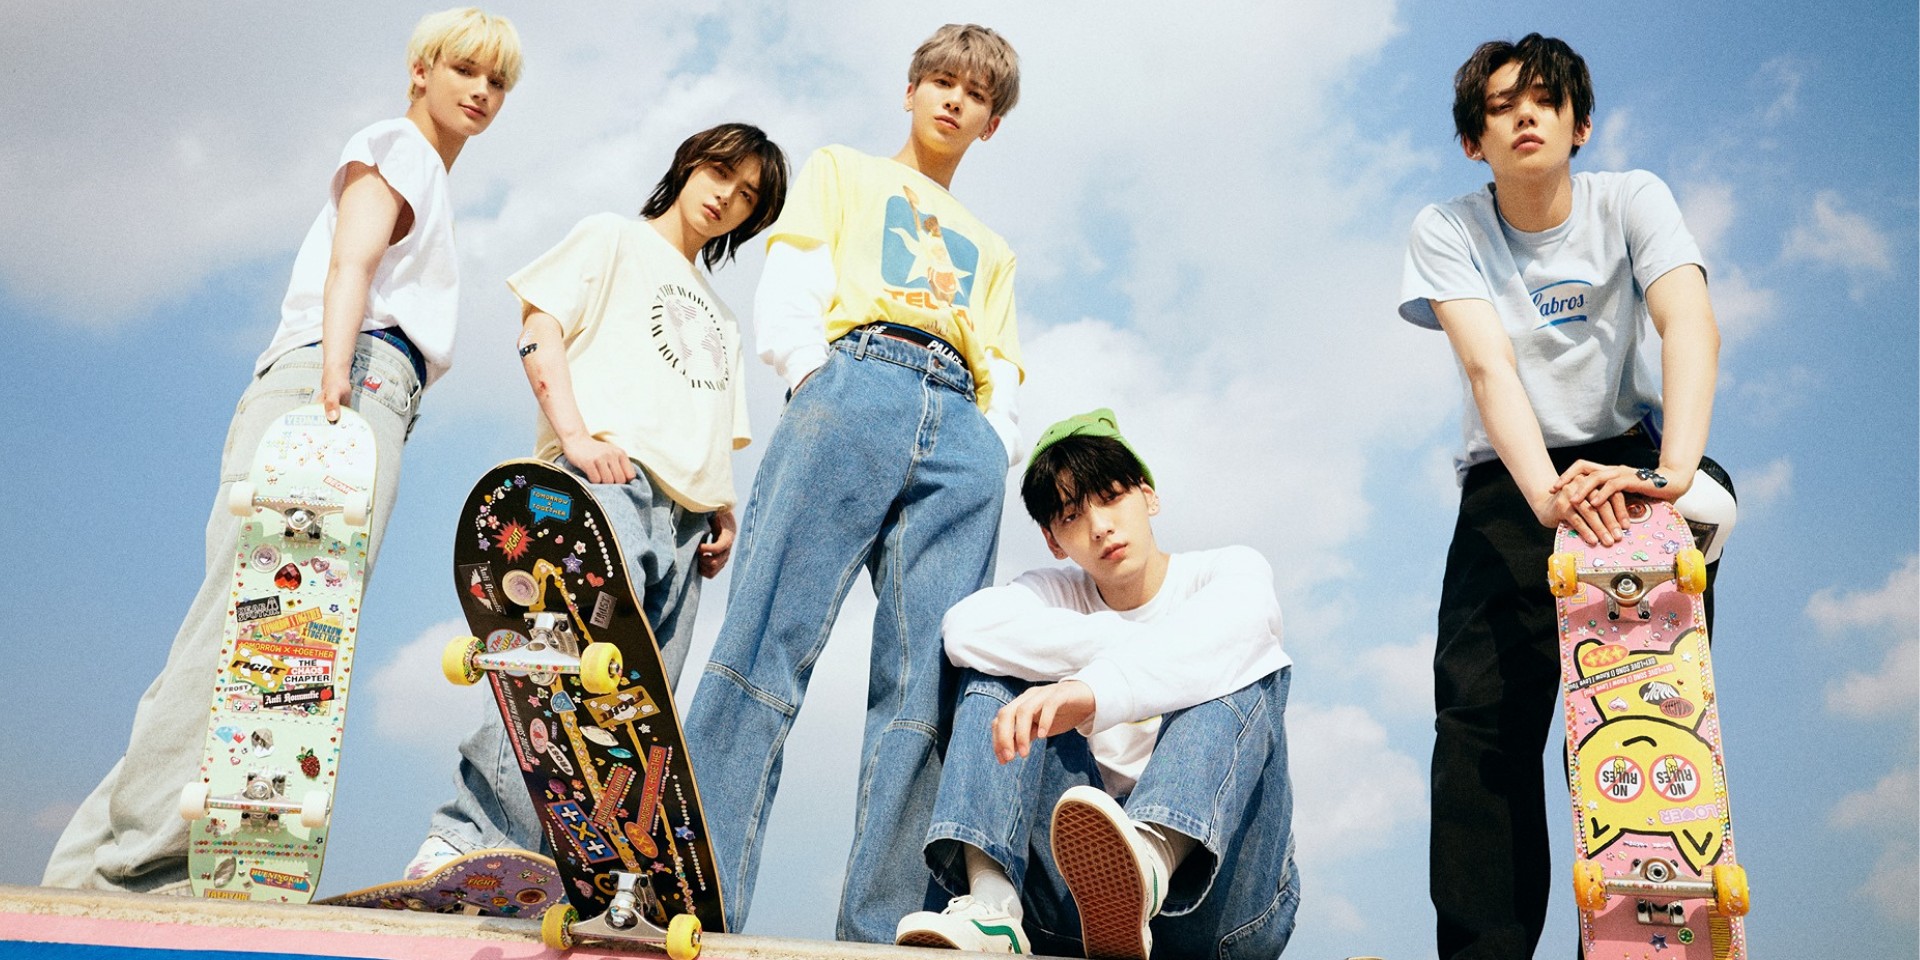 TXT release 'The Chaos Chapter: FIGHT OR ESCAPE' with music video for 'LO$ER=LO♡ER' - watch